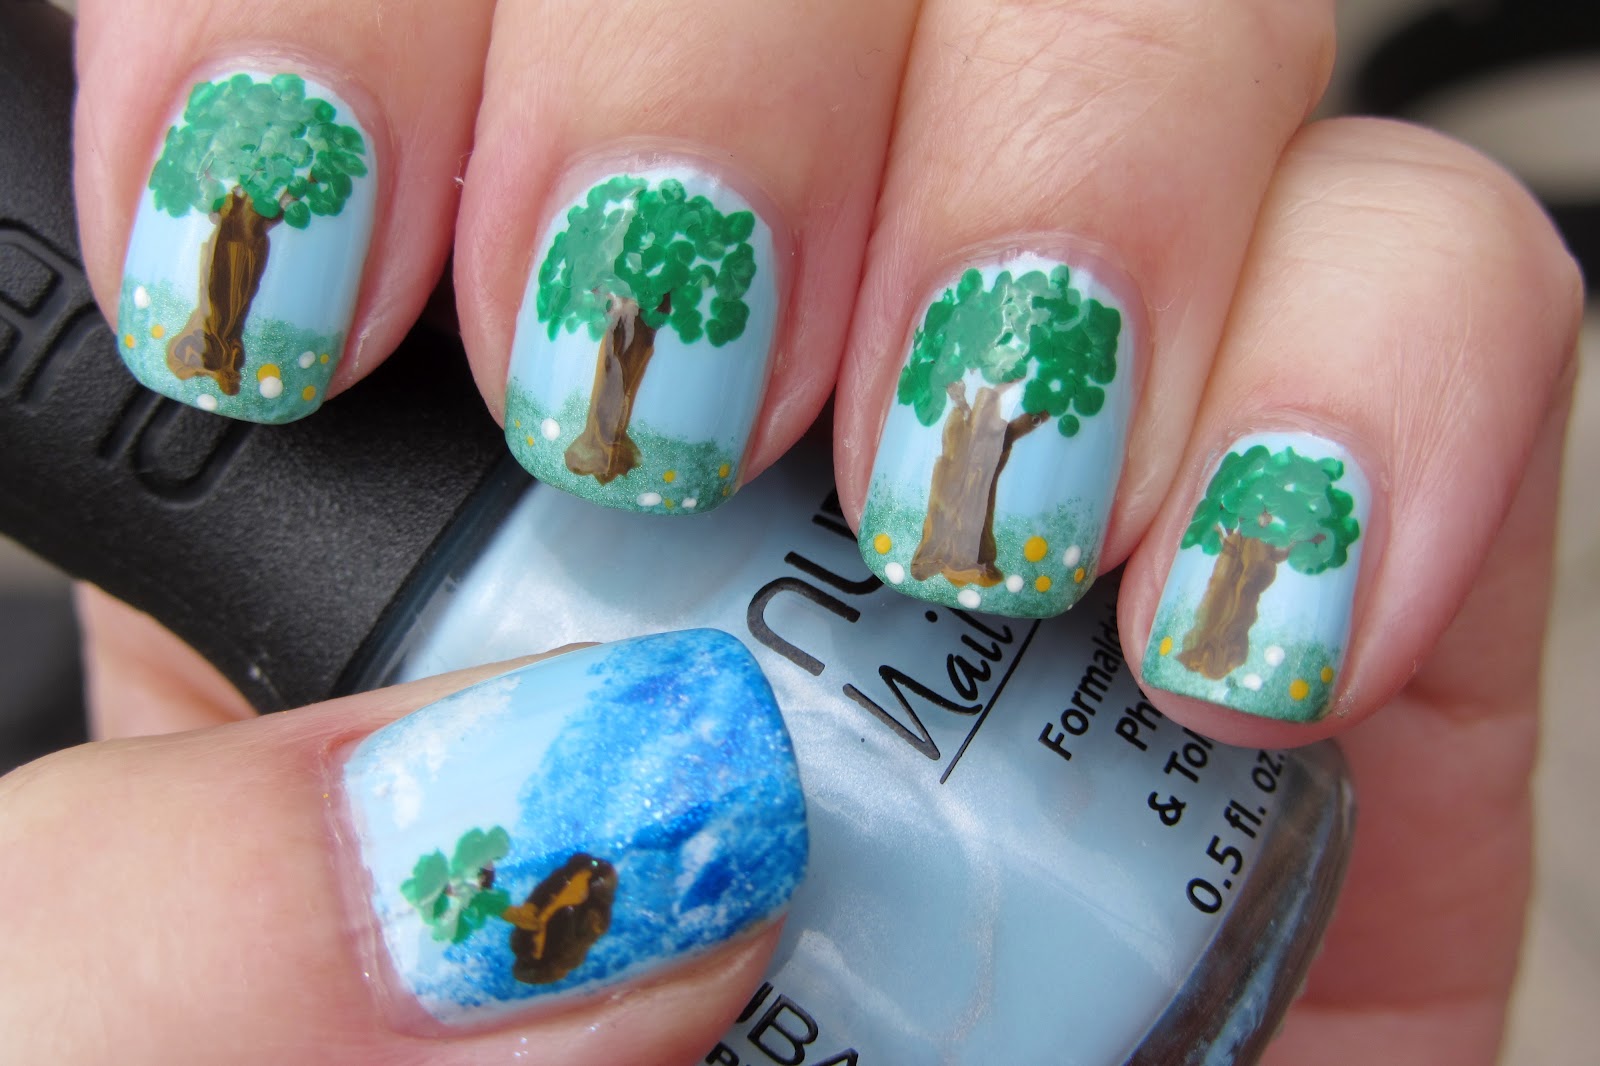 1. Nature-inspired nail art designs - wide 2